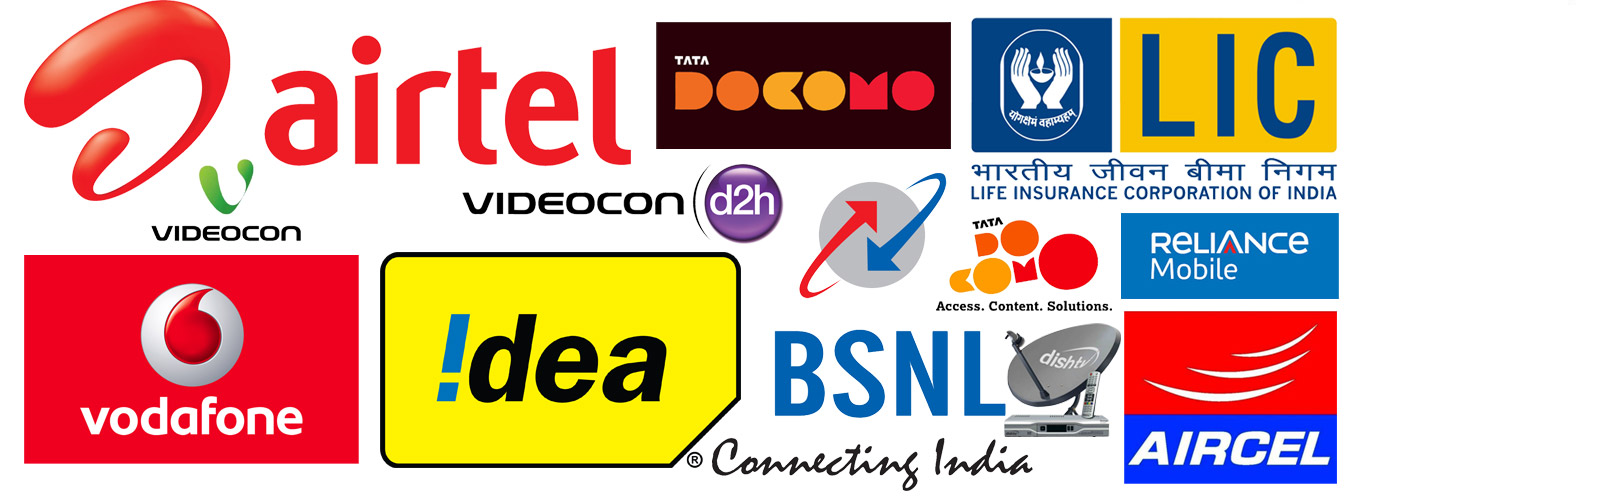 Airtel, Jio & Vodafone Idea New Mobile Recharge Plans Launched; Check  Calling, Data, SMS, and Other Benefits